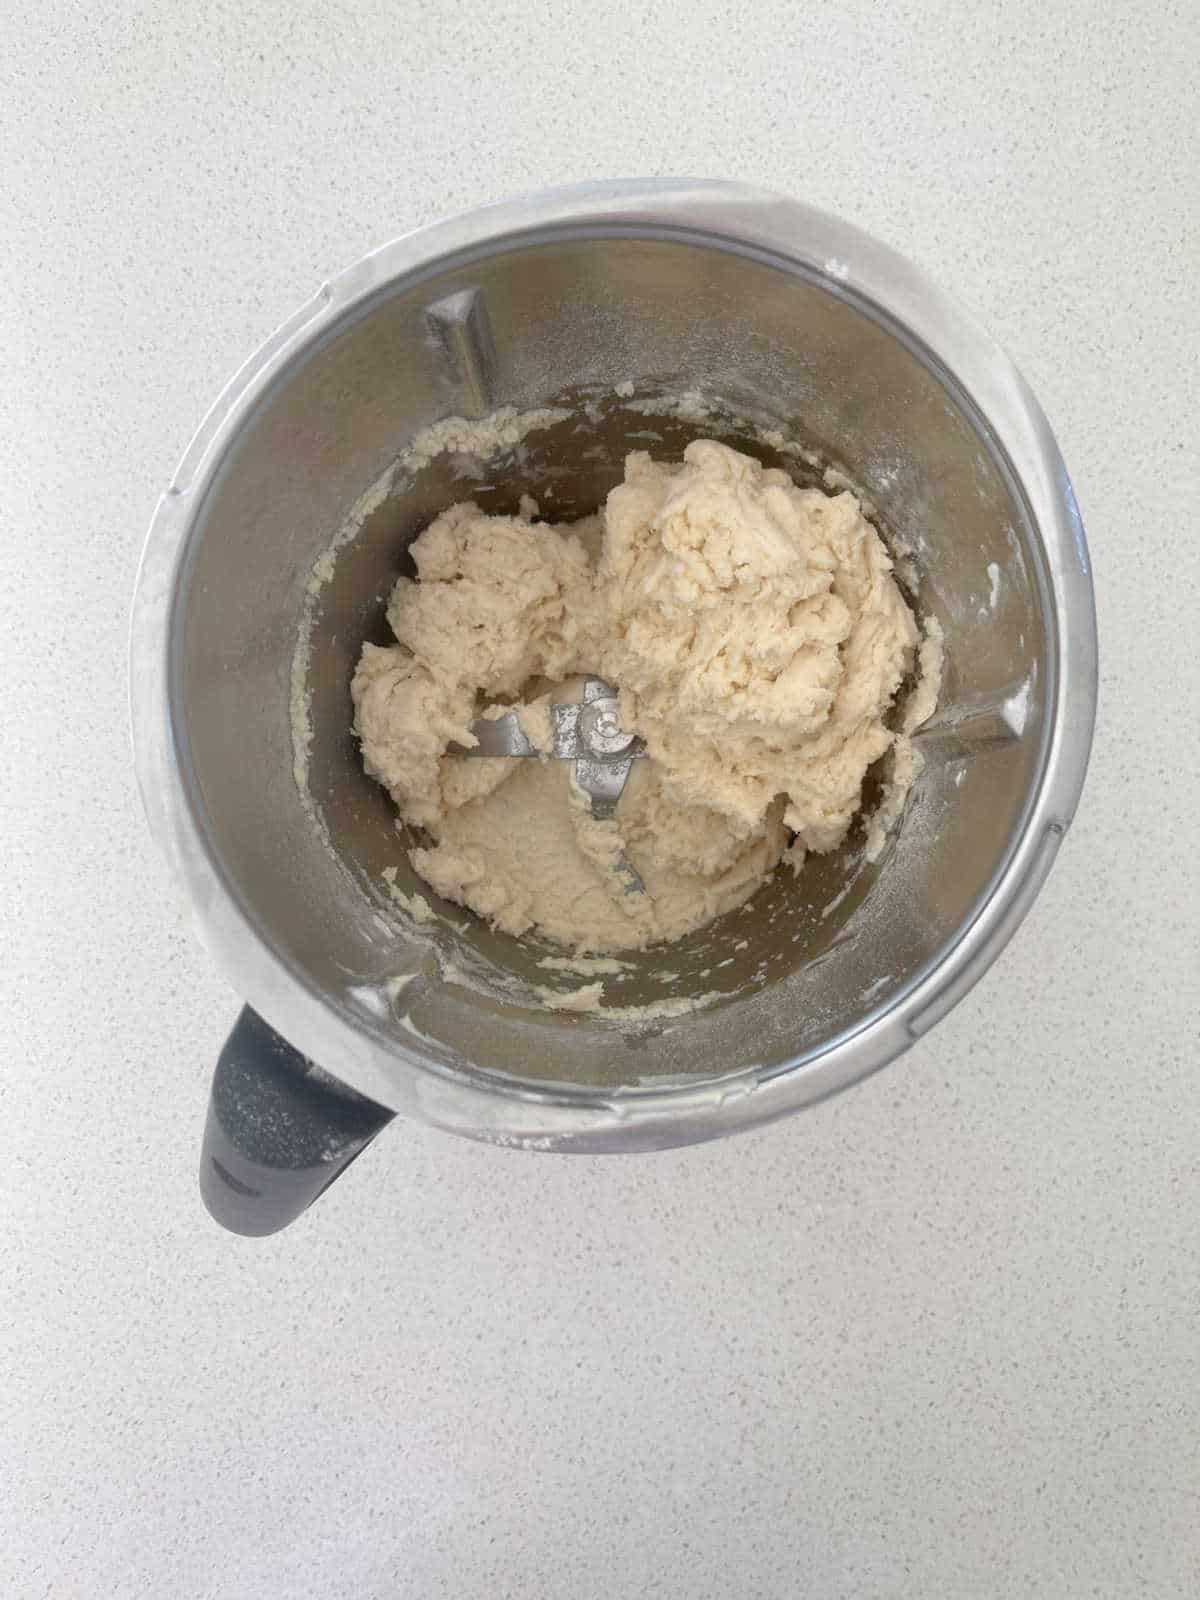 Scroll dough in a Thermomix bowl before it has been kneaded.